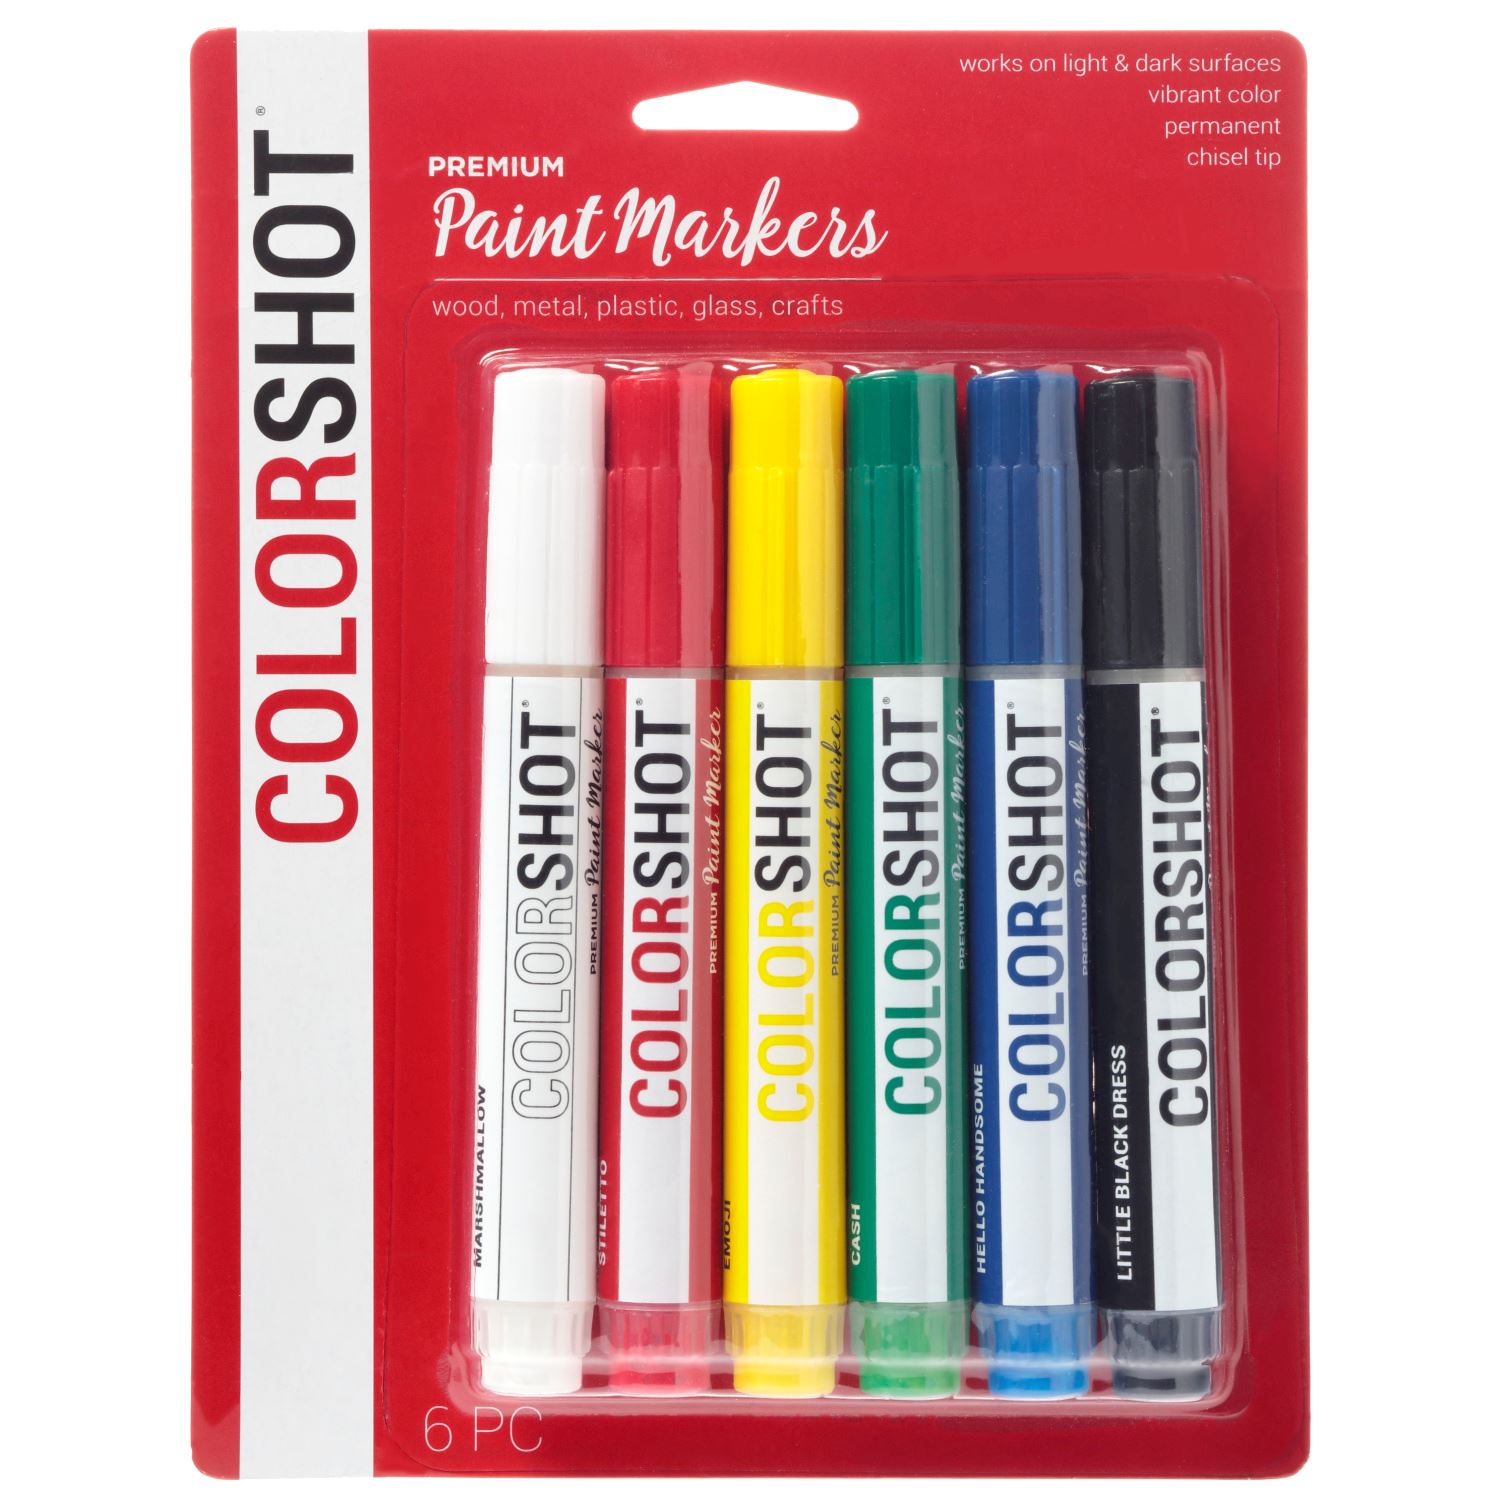 Paint Markers Wood